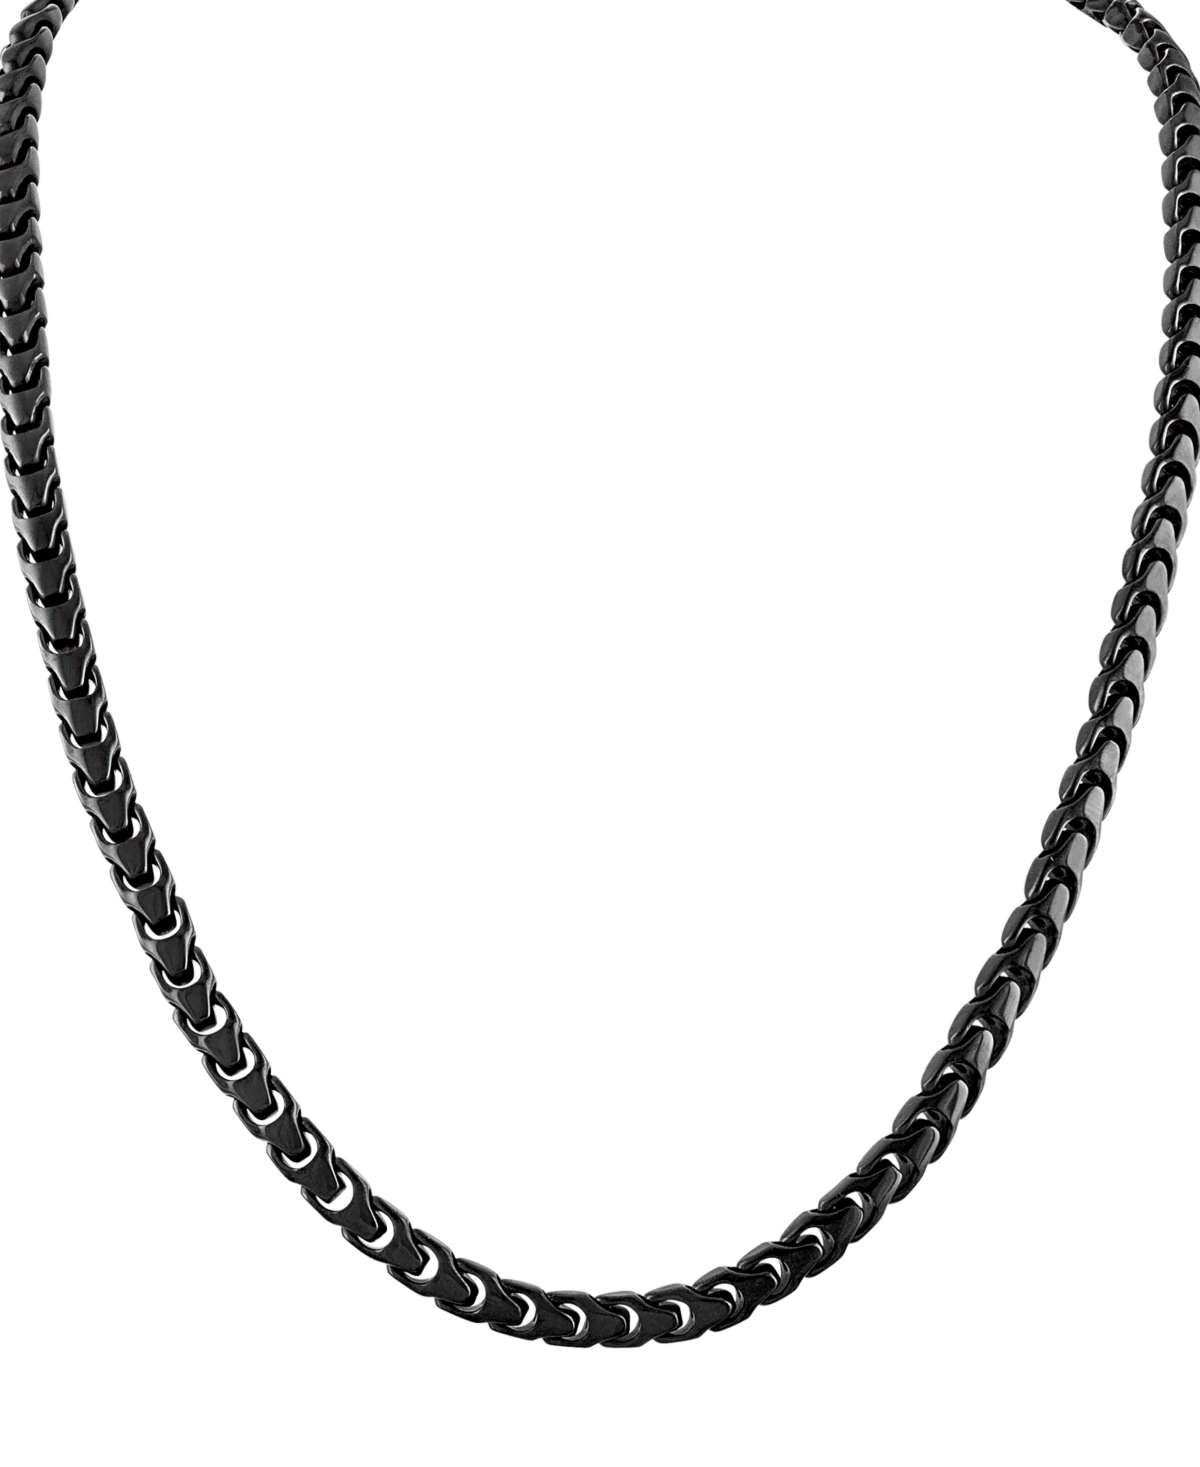 BULOVA MEN'S LINK CHAIN 22" NECKLACE IN BLACK-PLATED STAINLESS STEEL